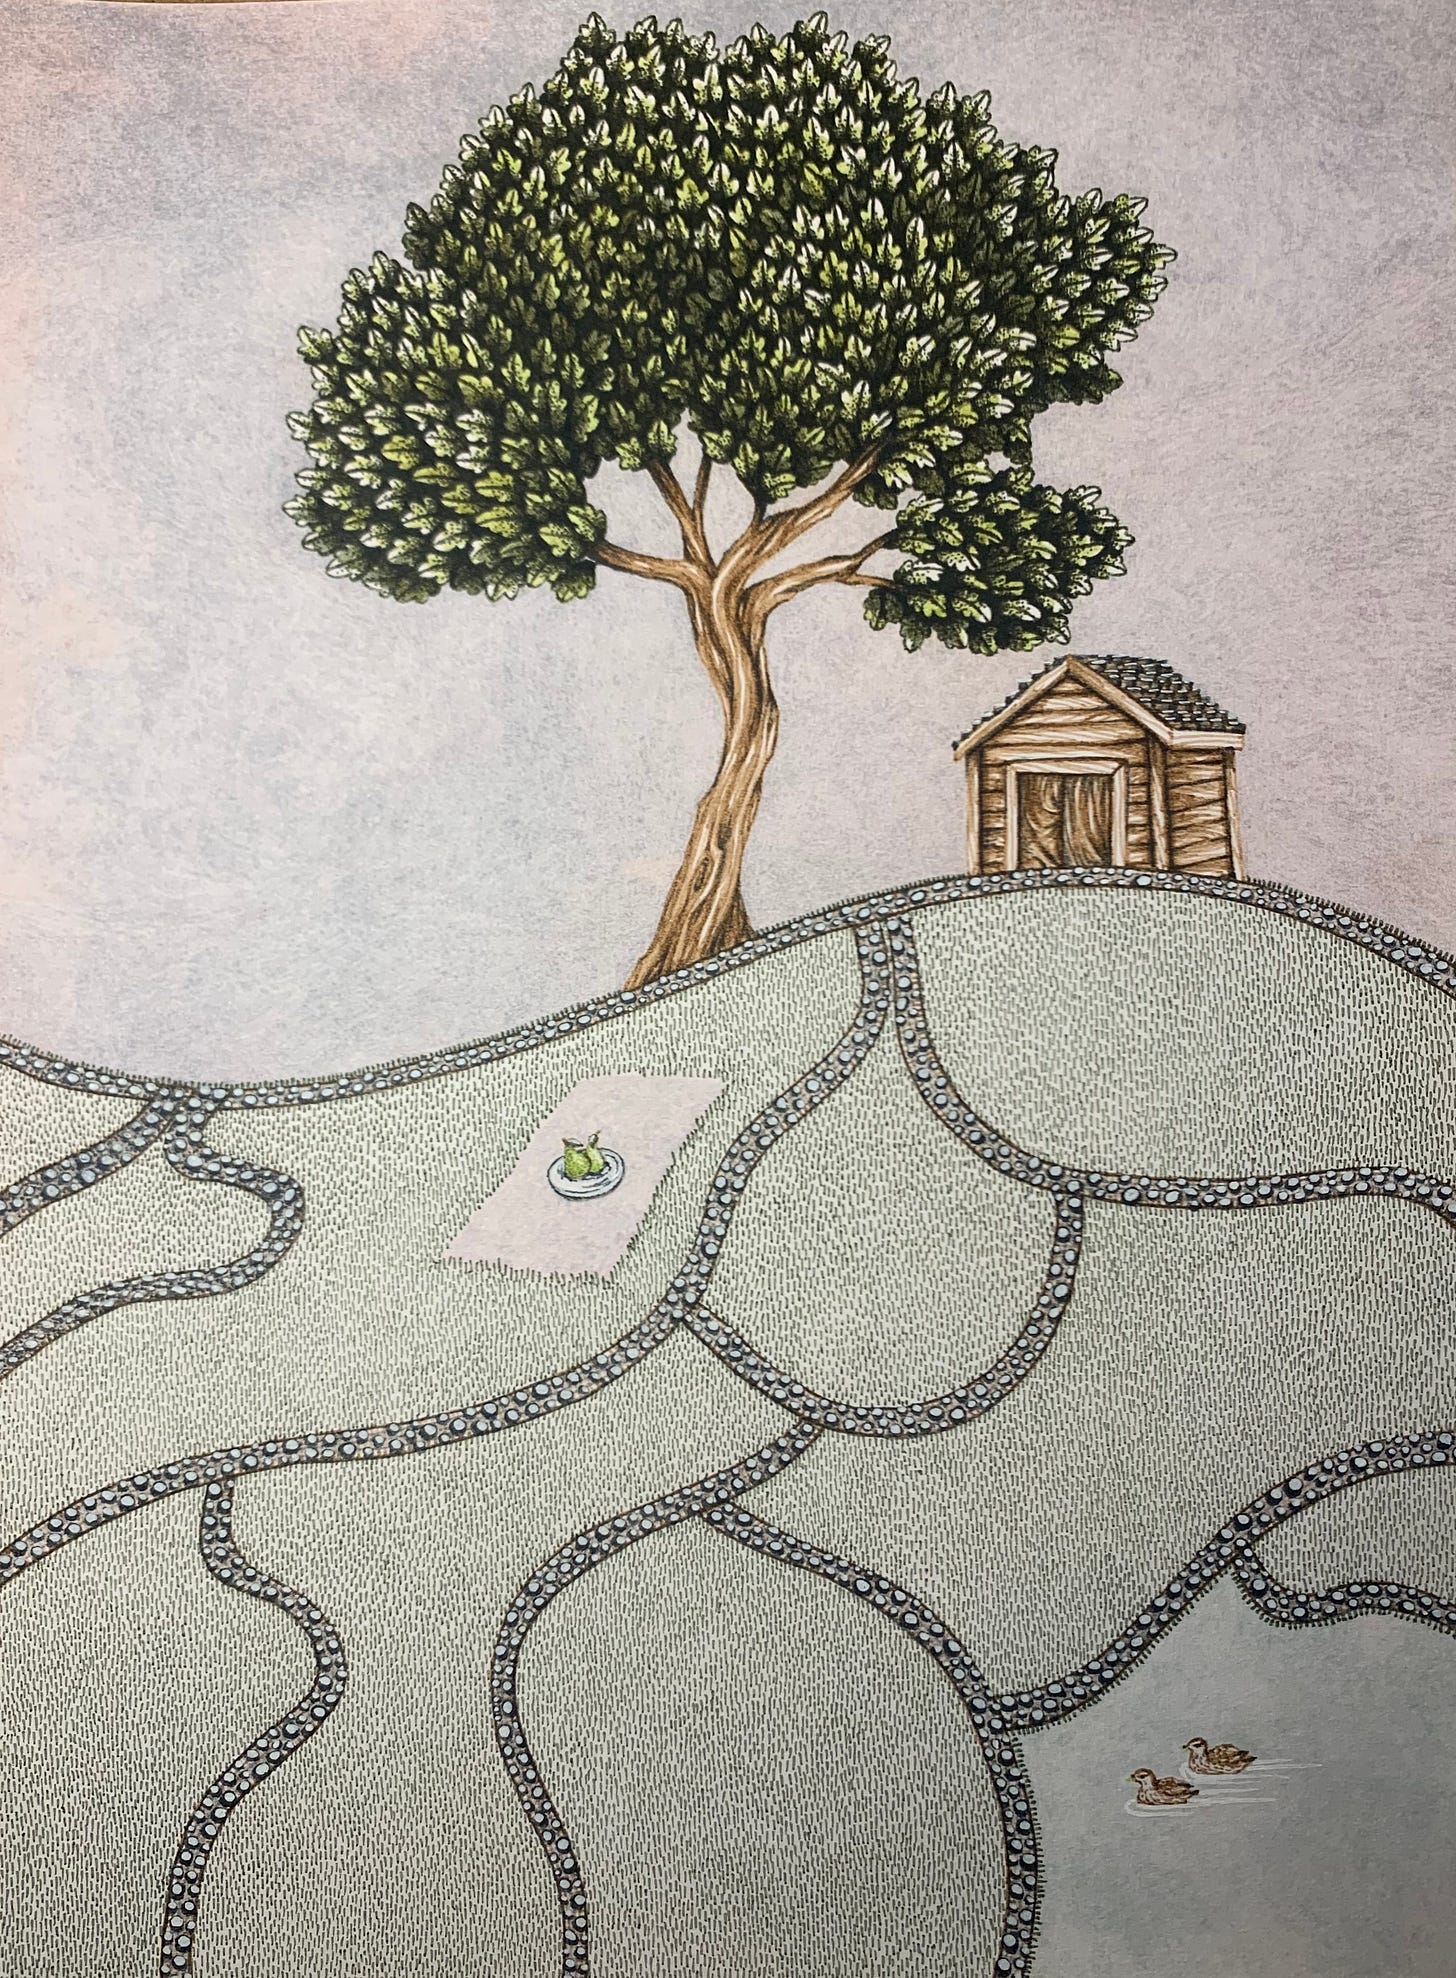 An ink drawing of a tree with a field underneath, with a shed, brick paths, and a duck pond.